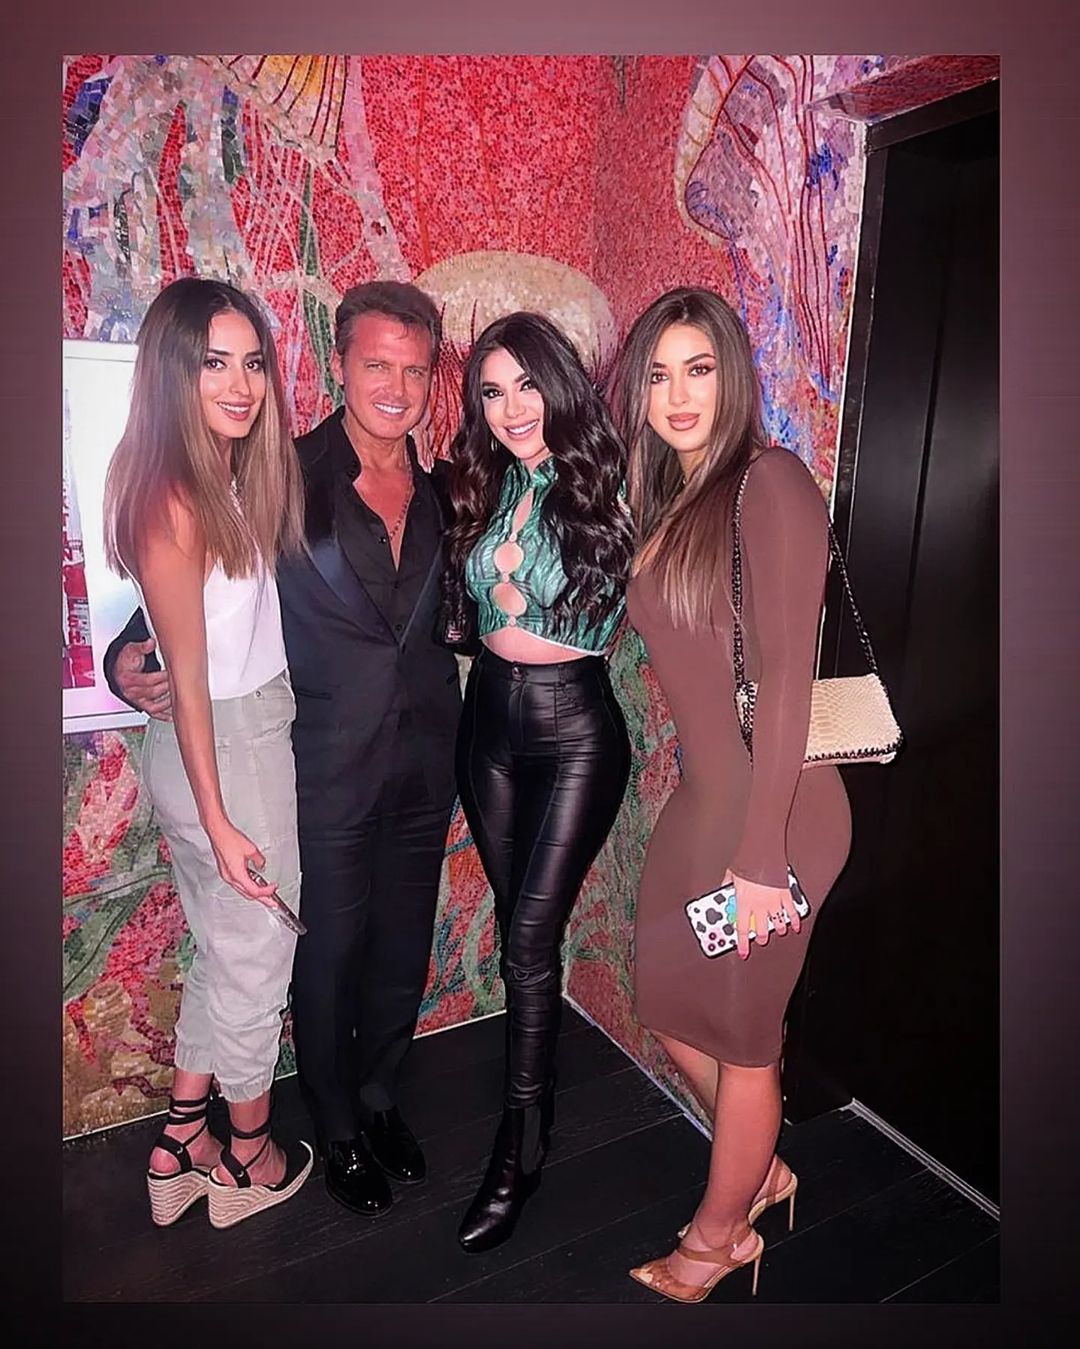 In early July, the artist was captured in Miami, in the company of beautiful women (Photo: Instagram @entrefamososmx)